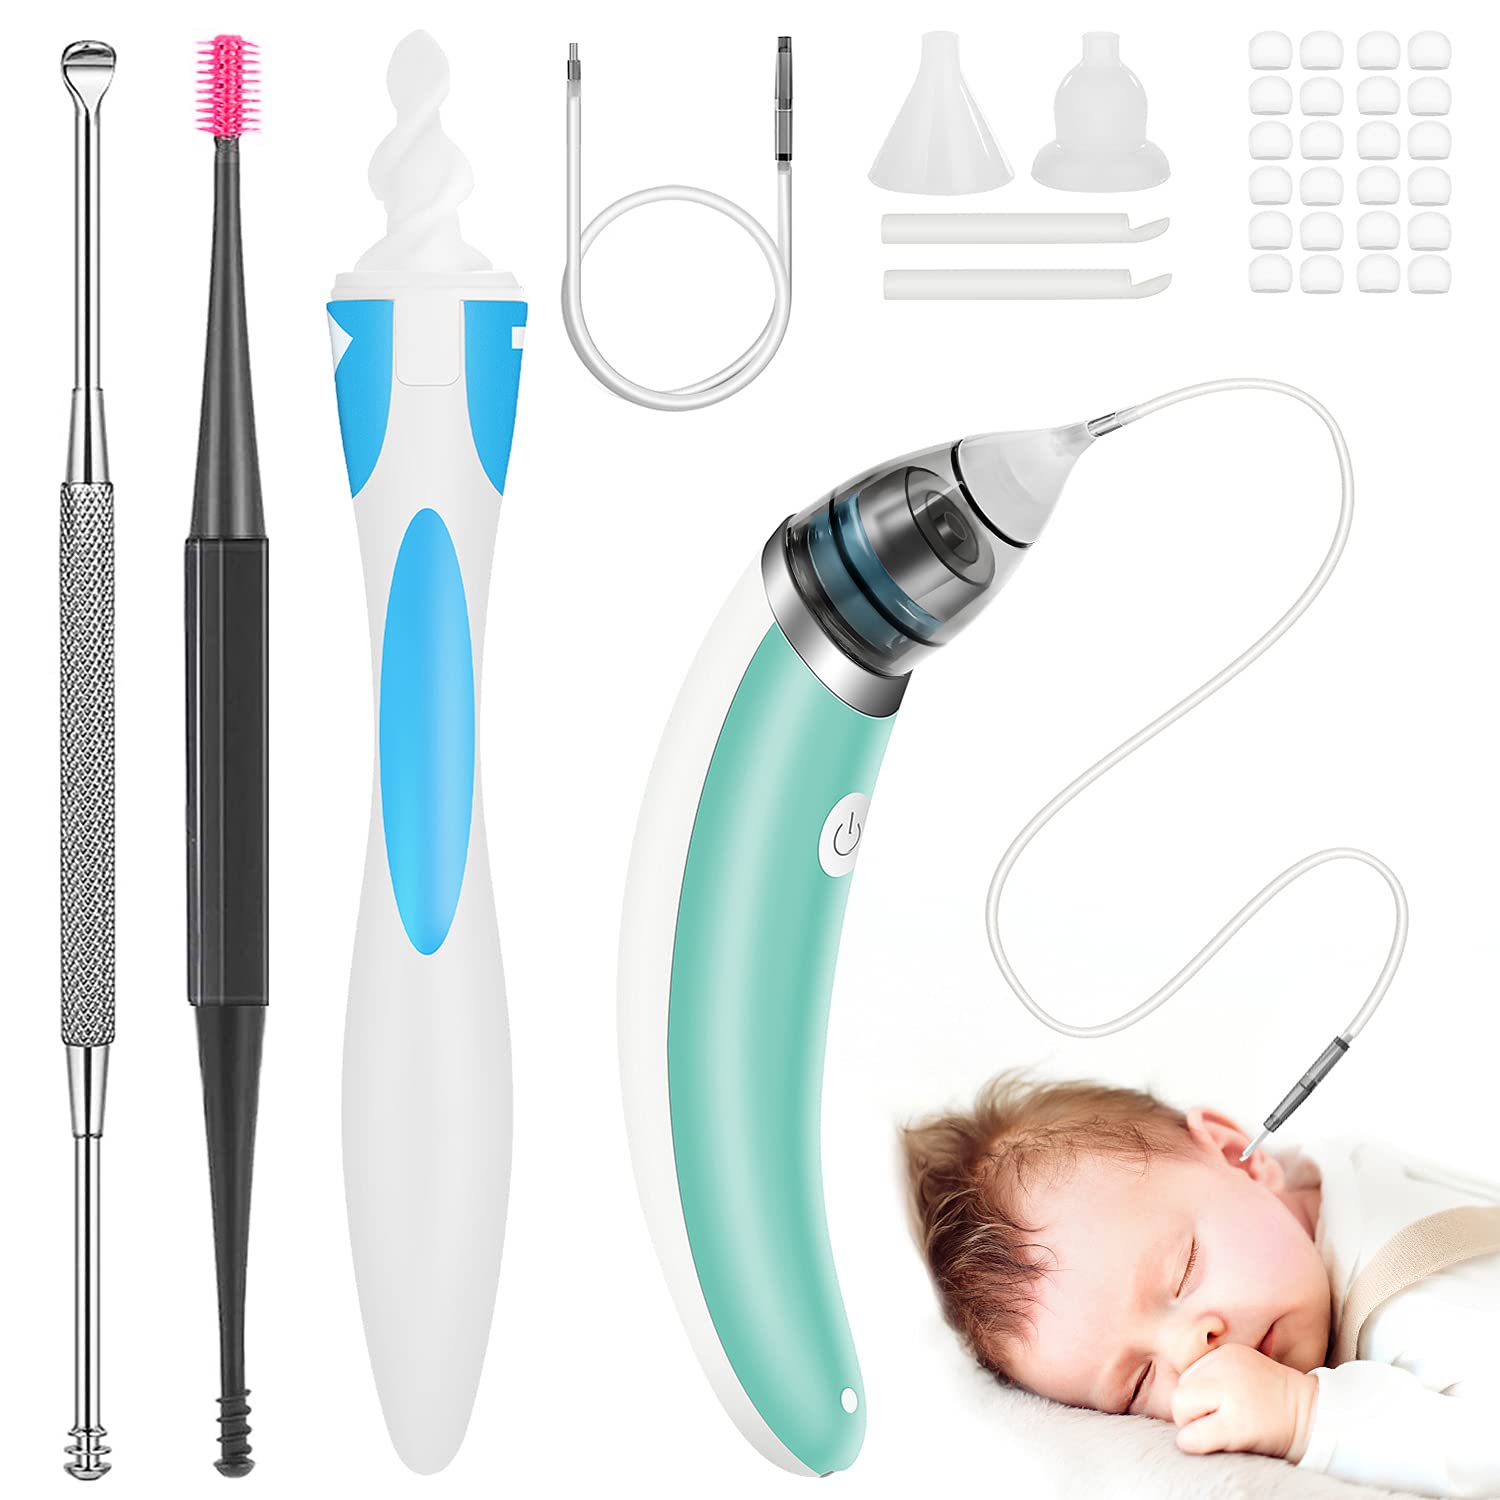 Ear-Wax-Vacuum-Removal Ear Wax Sucker 5 Levels of Suction Strong Electric Ear  Cleaner USB Charge Soft Earwax Removal Kit Reusable Spiral Silicone Ear Wax  Remover Tool Vacuum Cleaner for Kids Adult